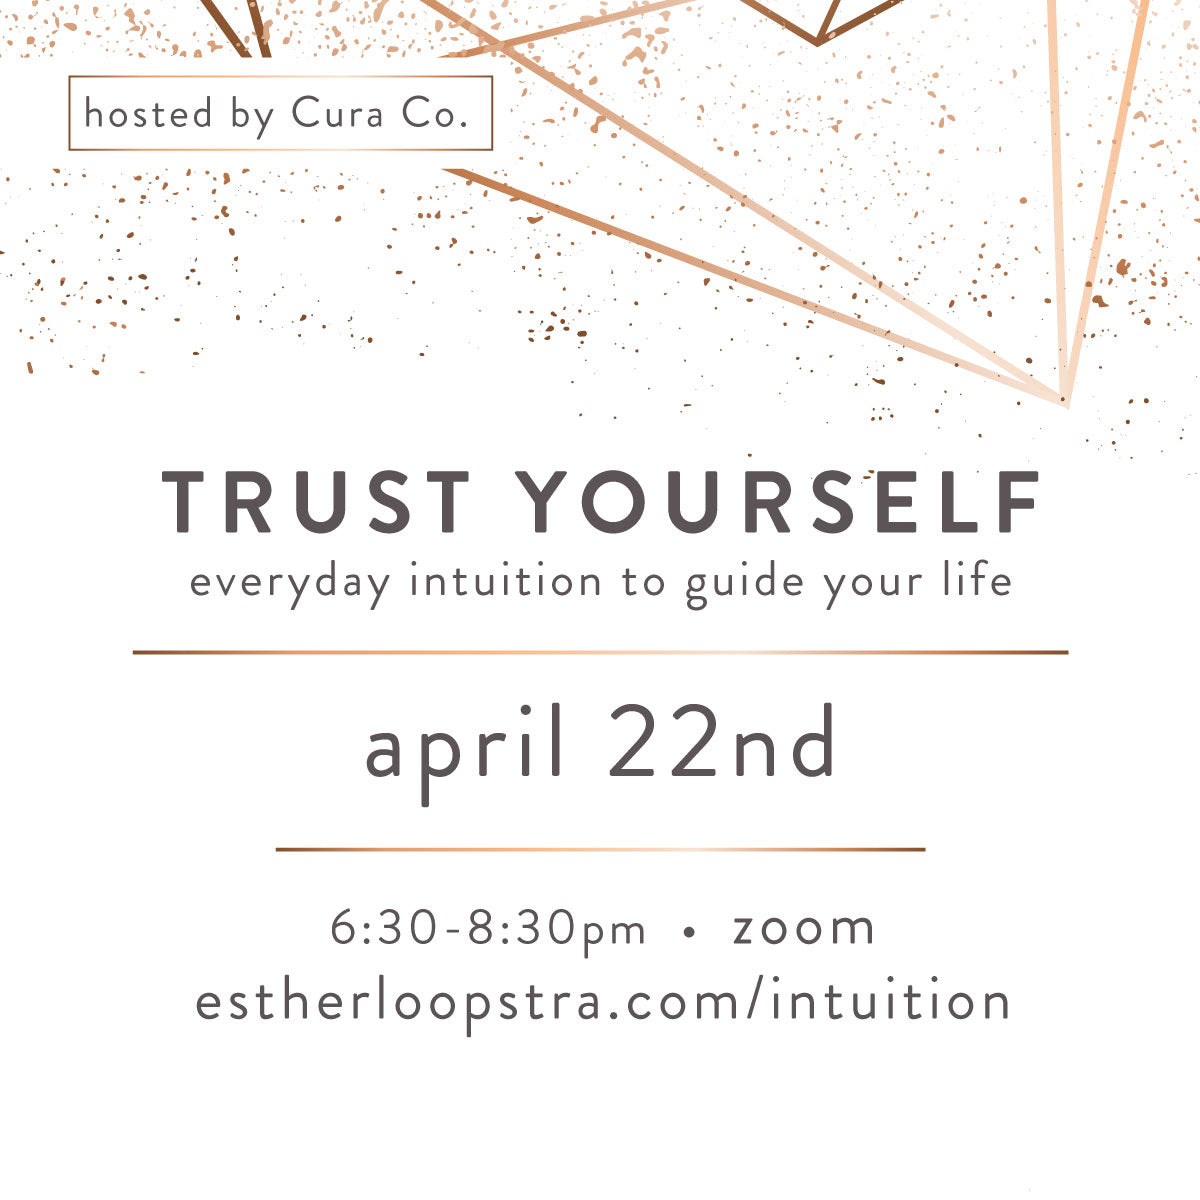 Trust your self everyday intuition to guide your life with Esther Loopstra